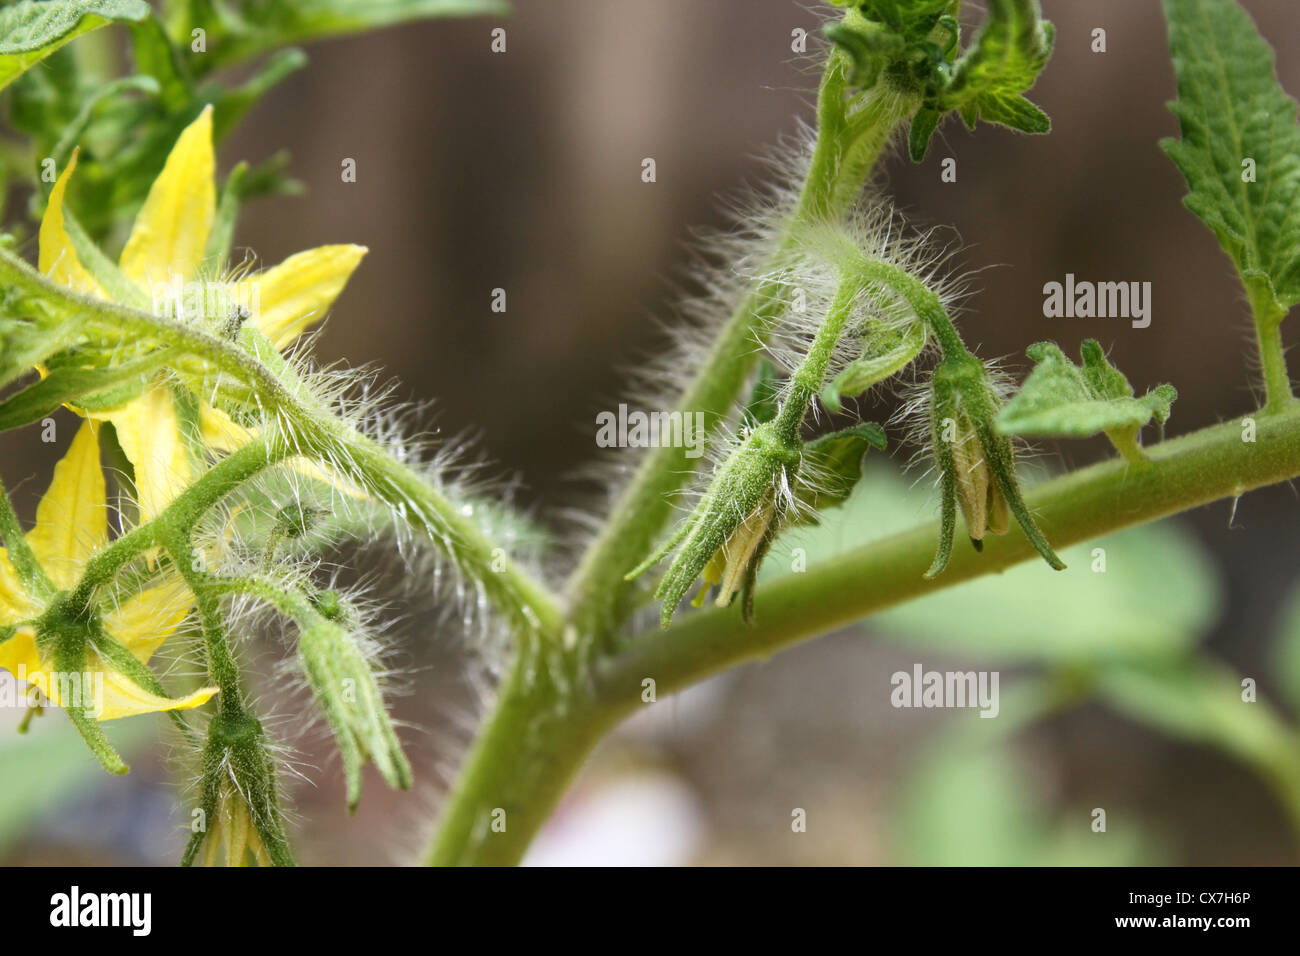 Glandular hairs or trichomes on the stem of a grown tomato plant Stock Photo